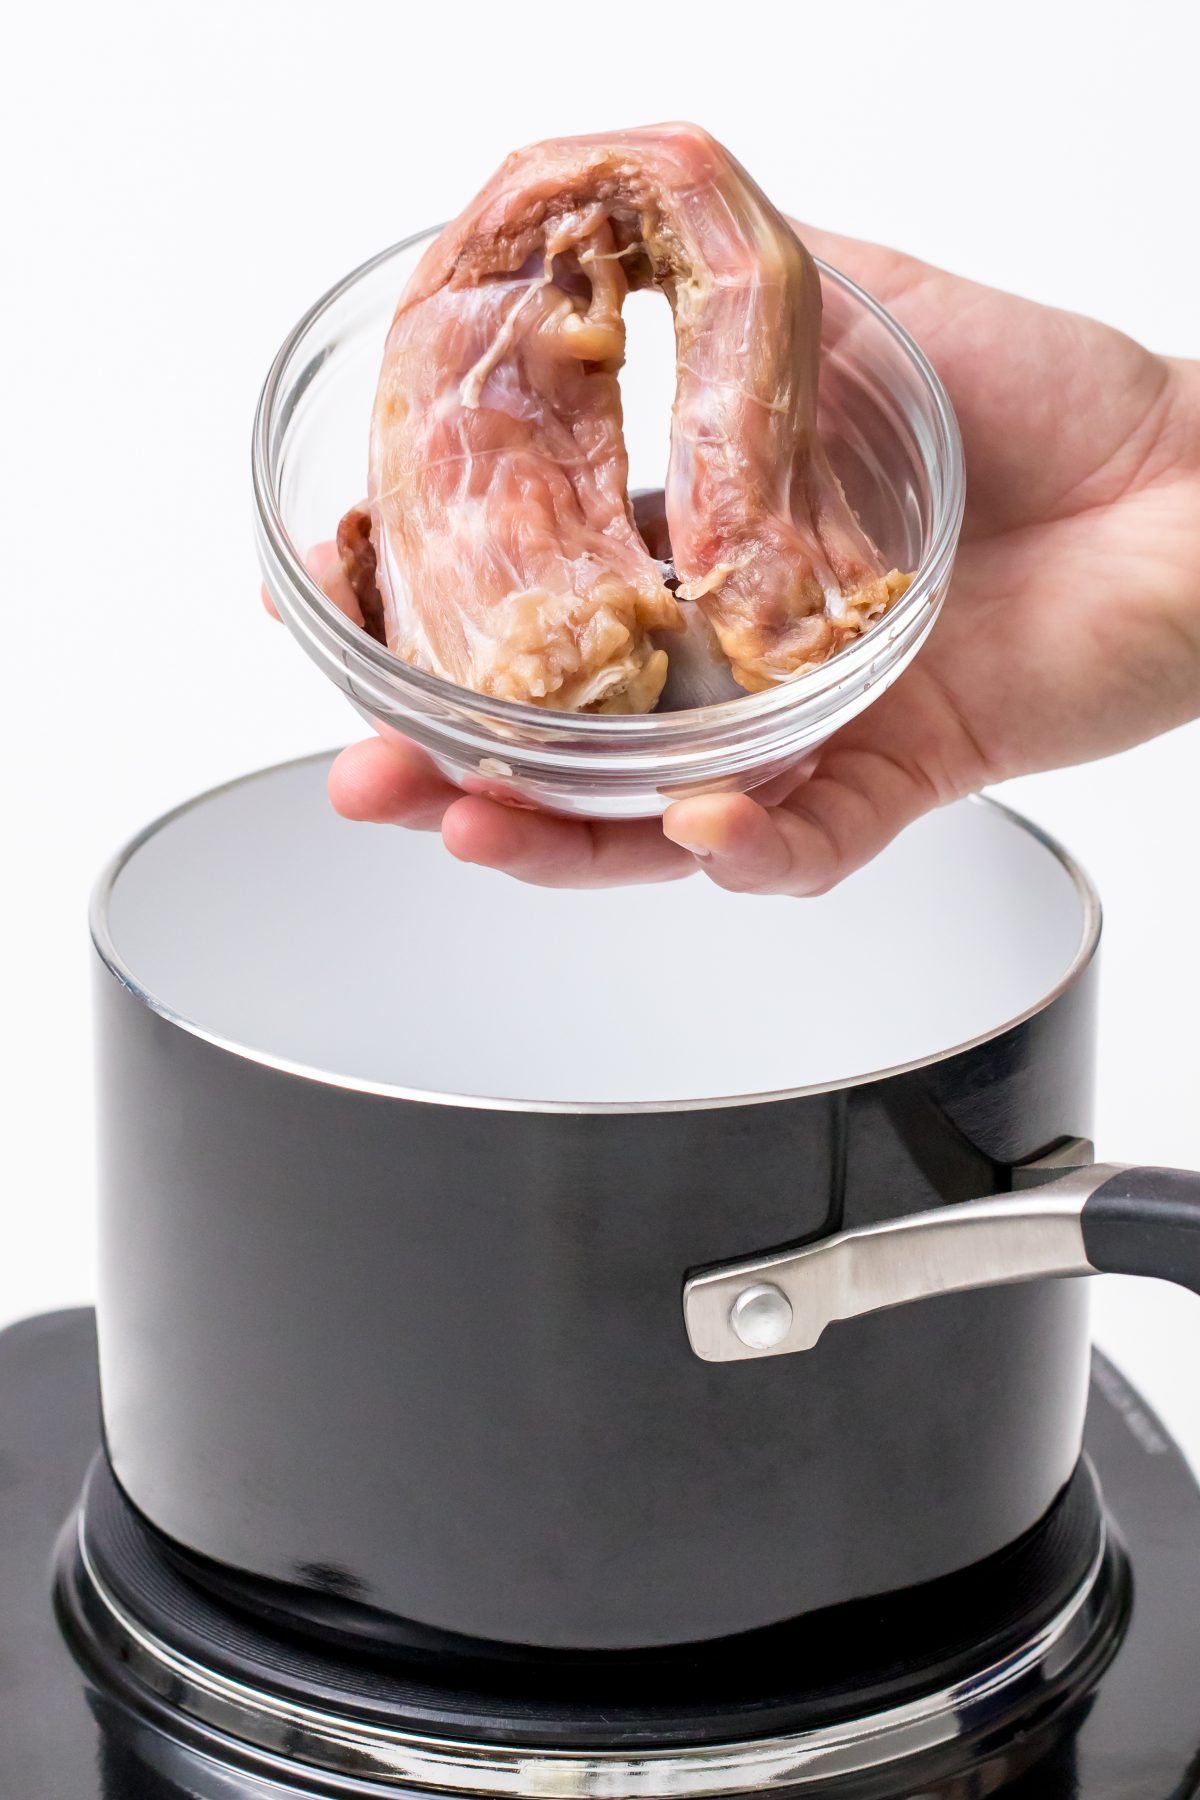 5D4B2362 - James Beard Roasted Turkey - placing turkey neck and giblets in a sauce pan